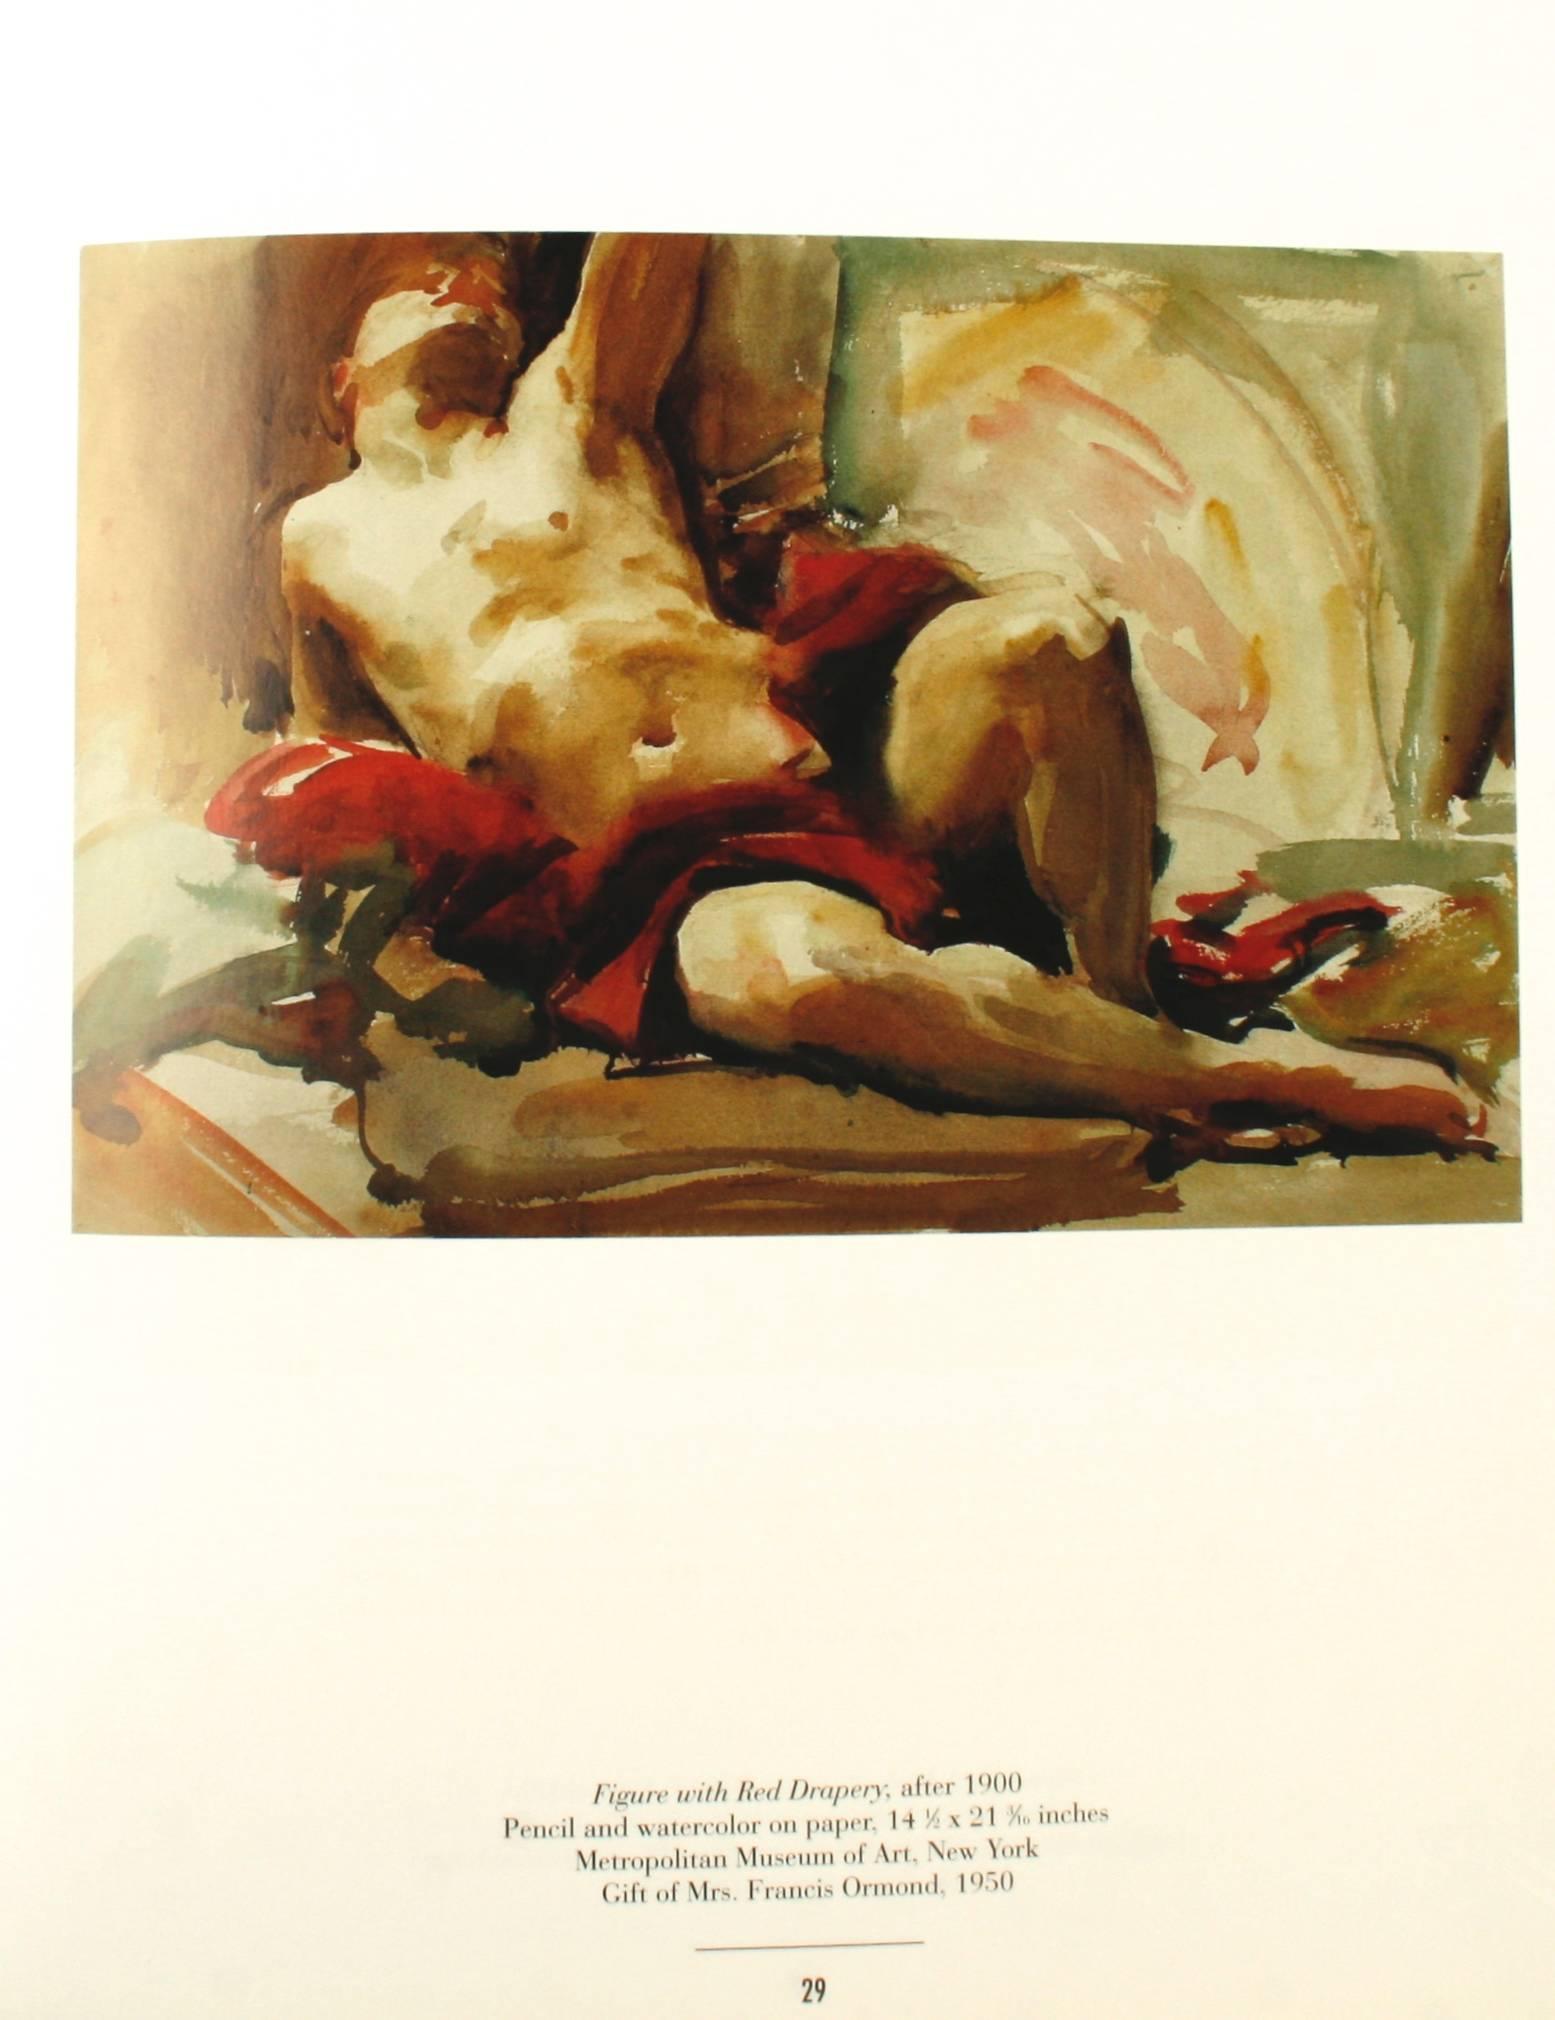 American John Singer Sargent, the Male Nudes